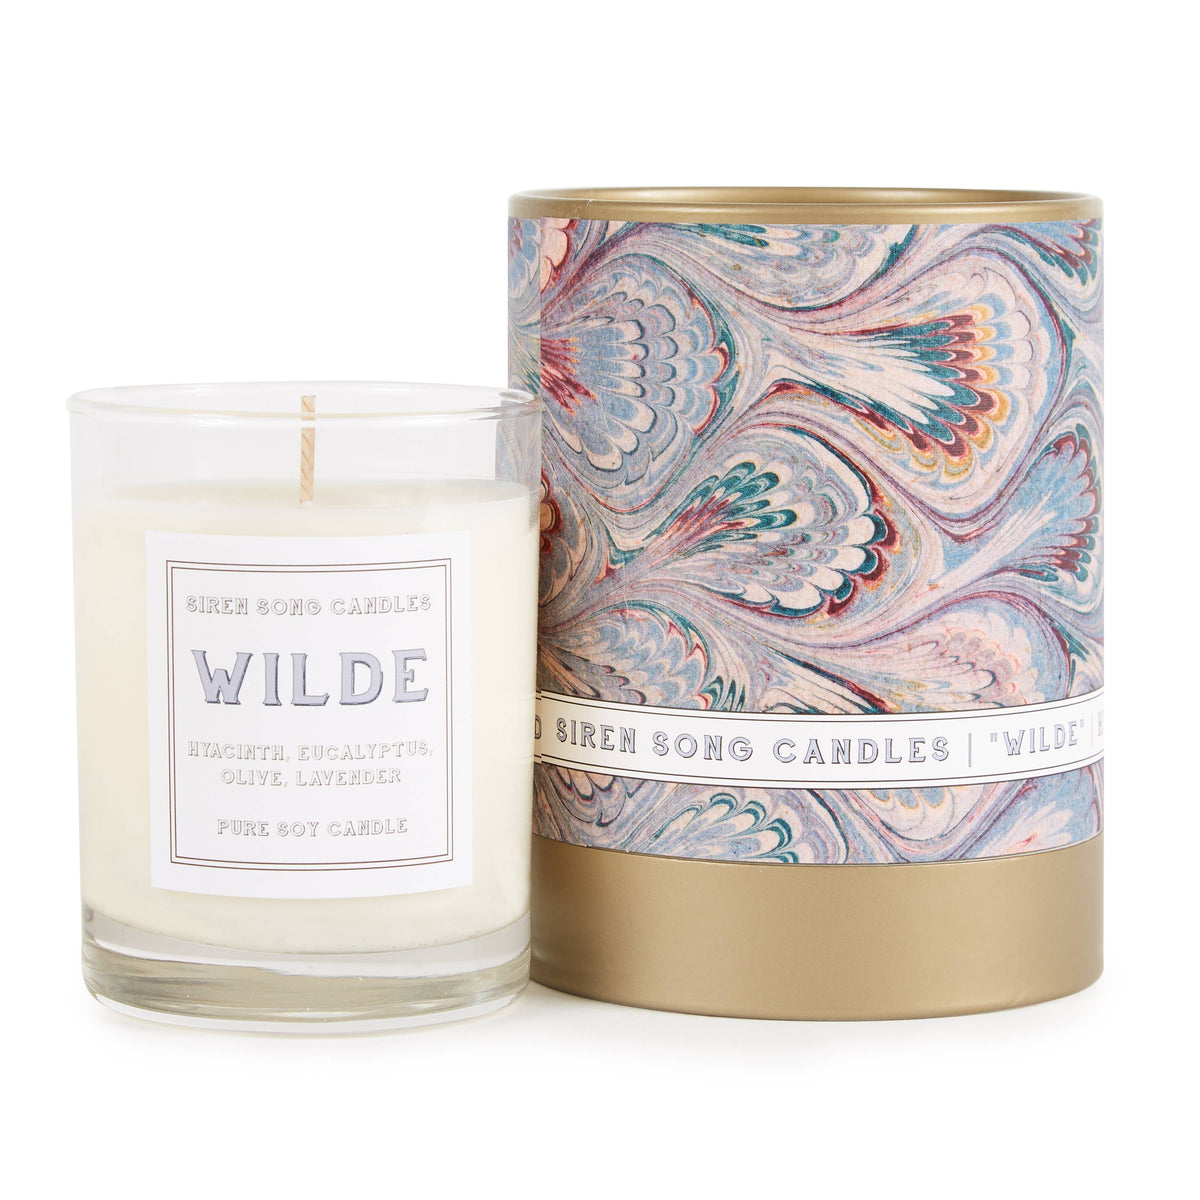 WILDE SOY CANDLE